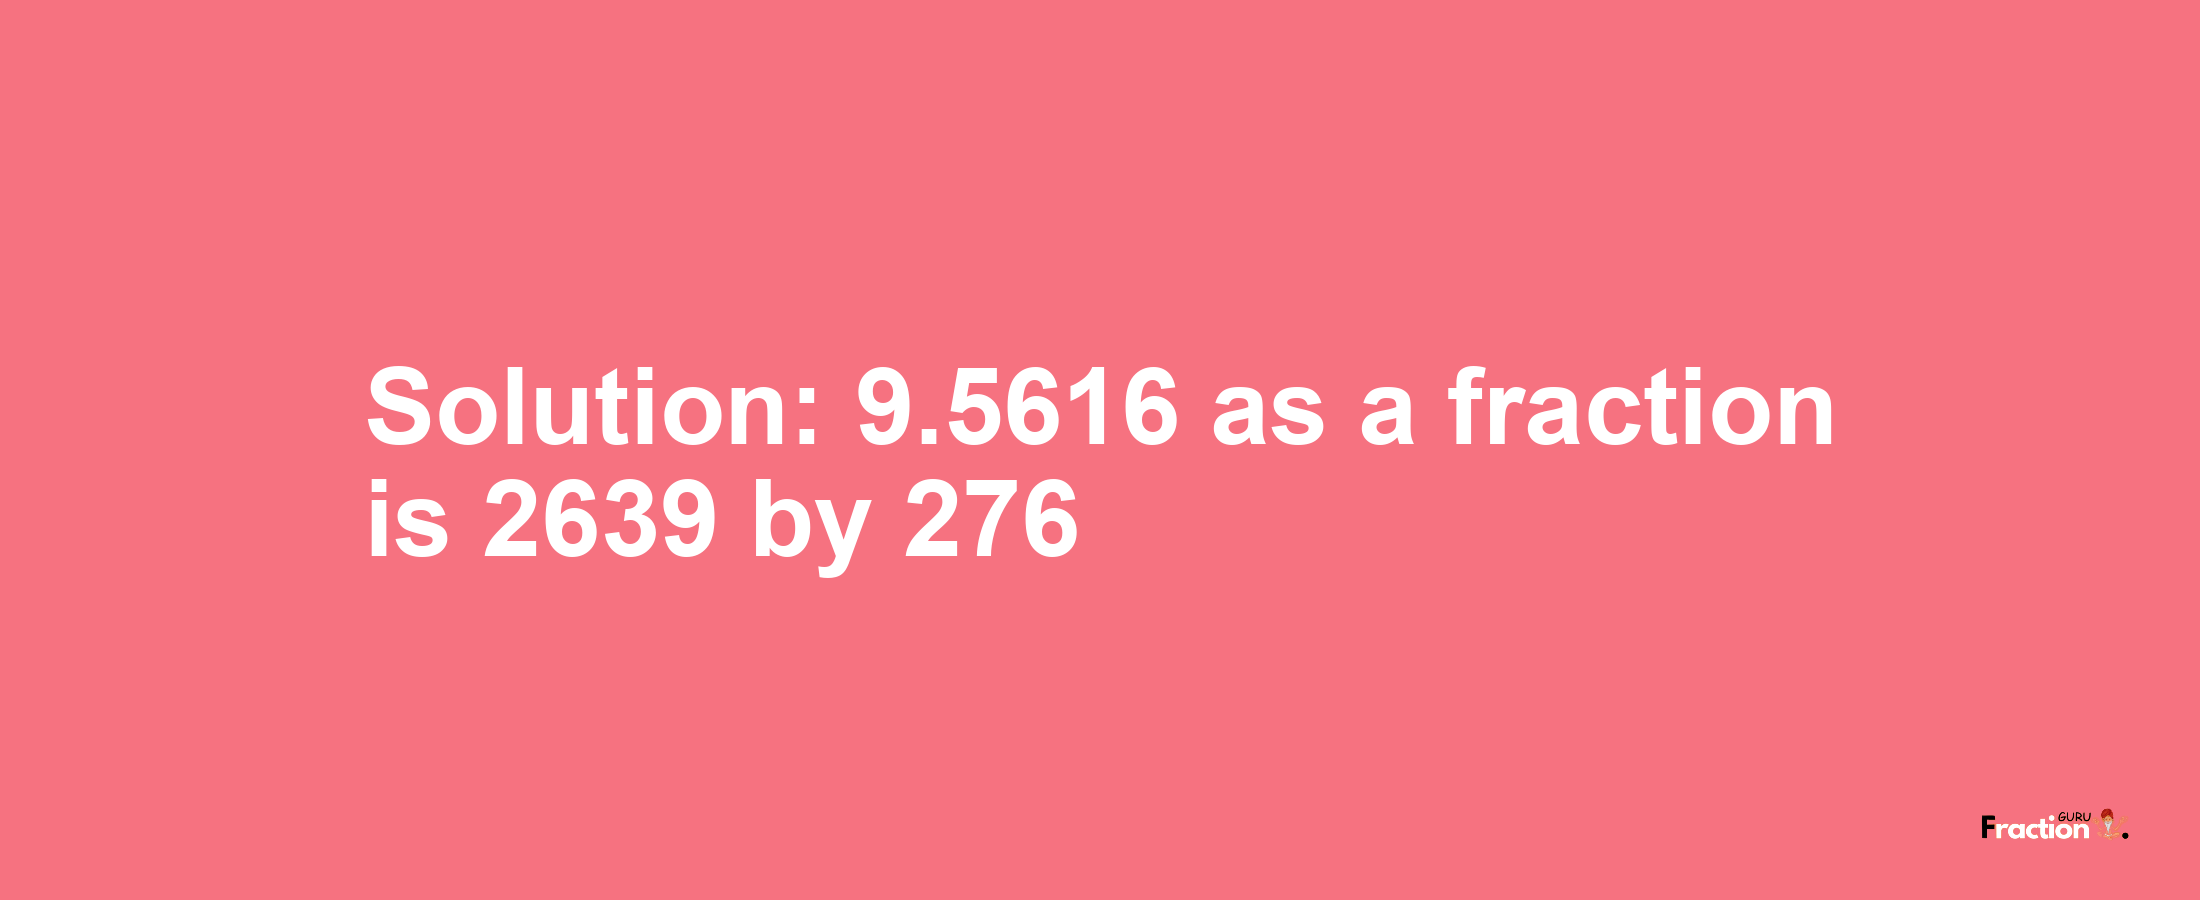 Solution:9.5616 as a fraction is 2639/276